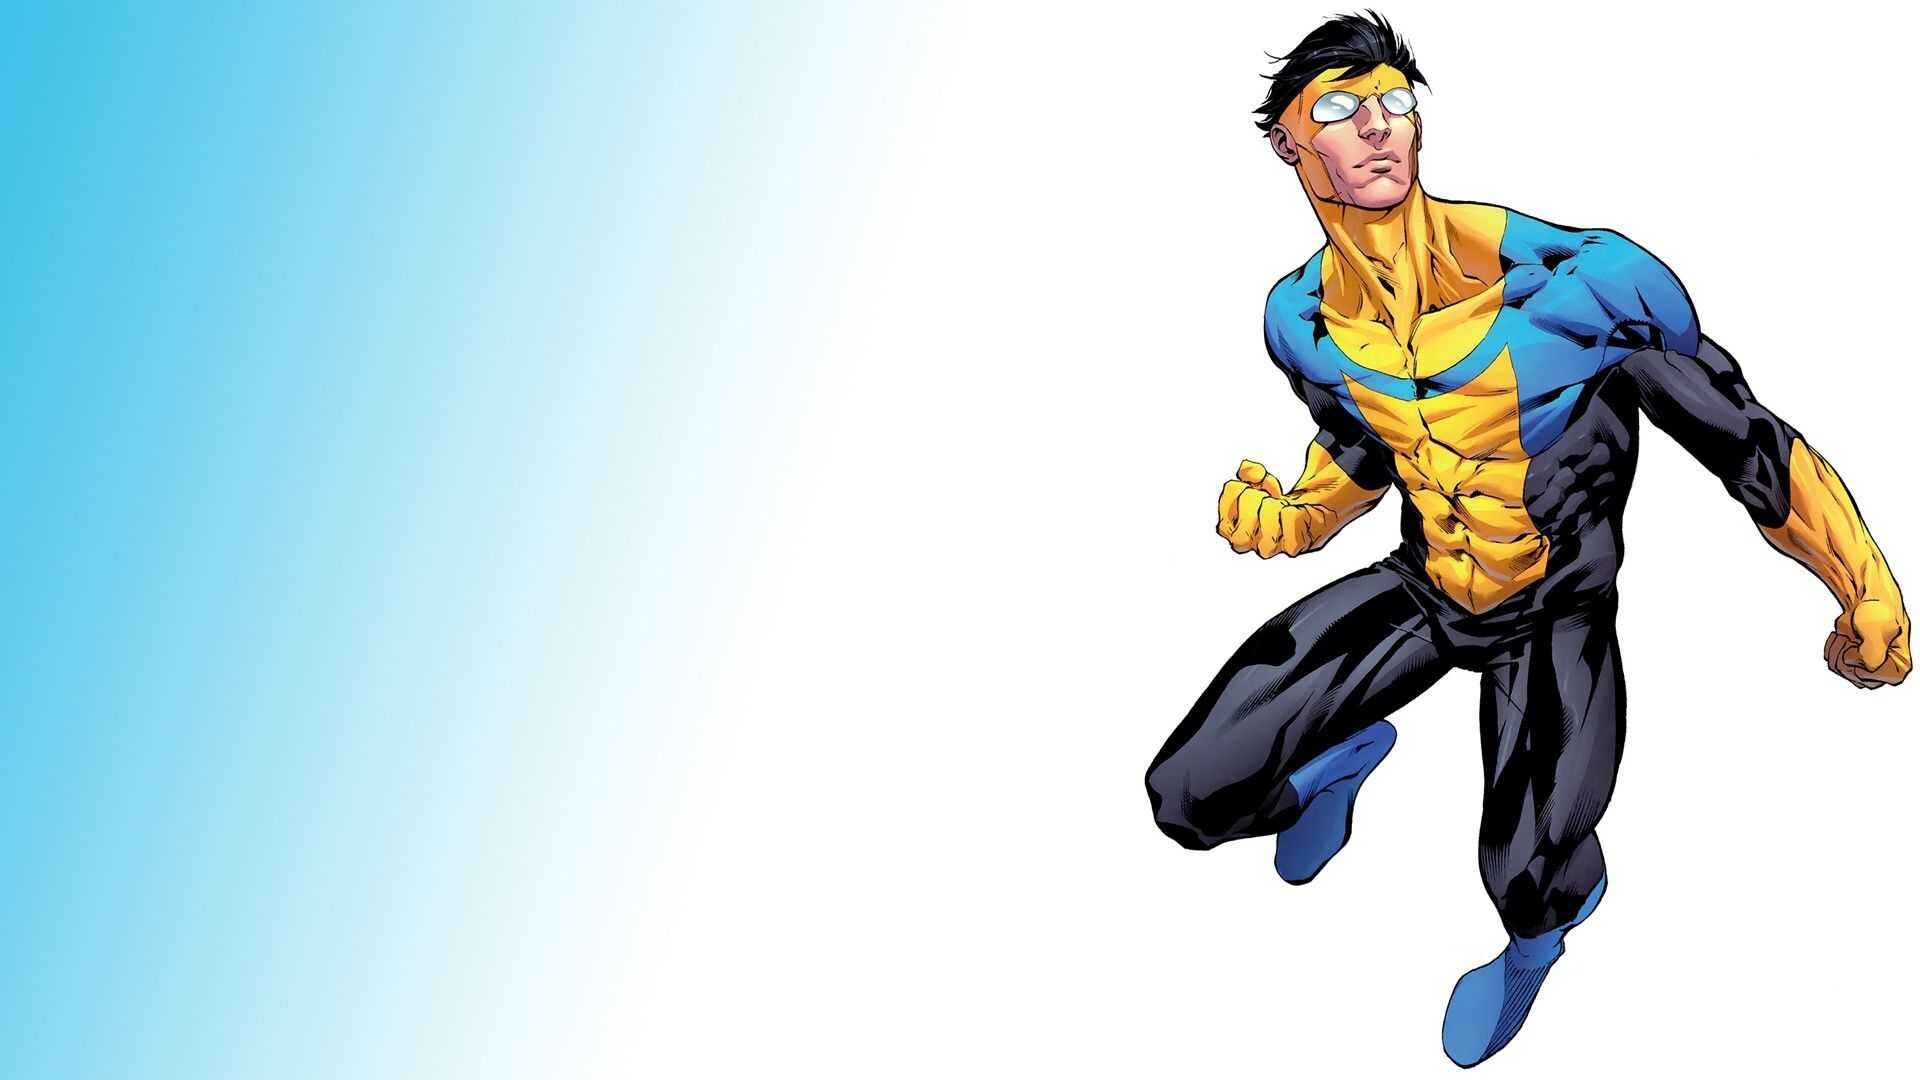 Invincible, Animated wallpaper, Superpowered protagonist, Thrilling battles, 1920x1080 Full HD Desktop